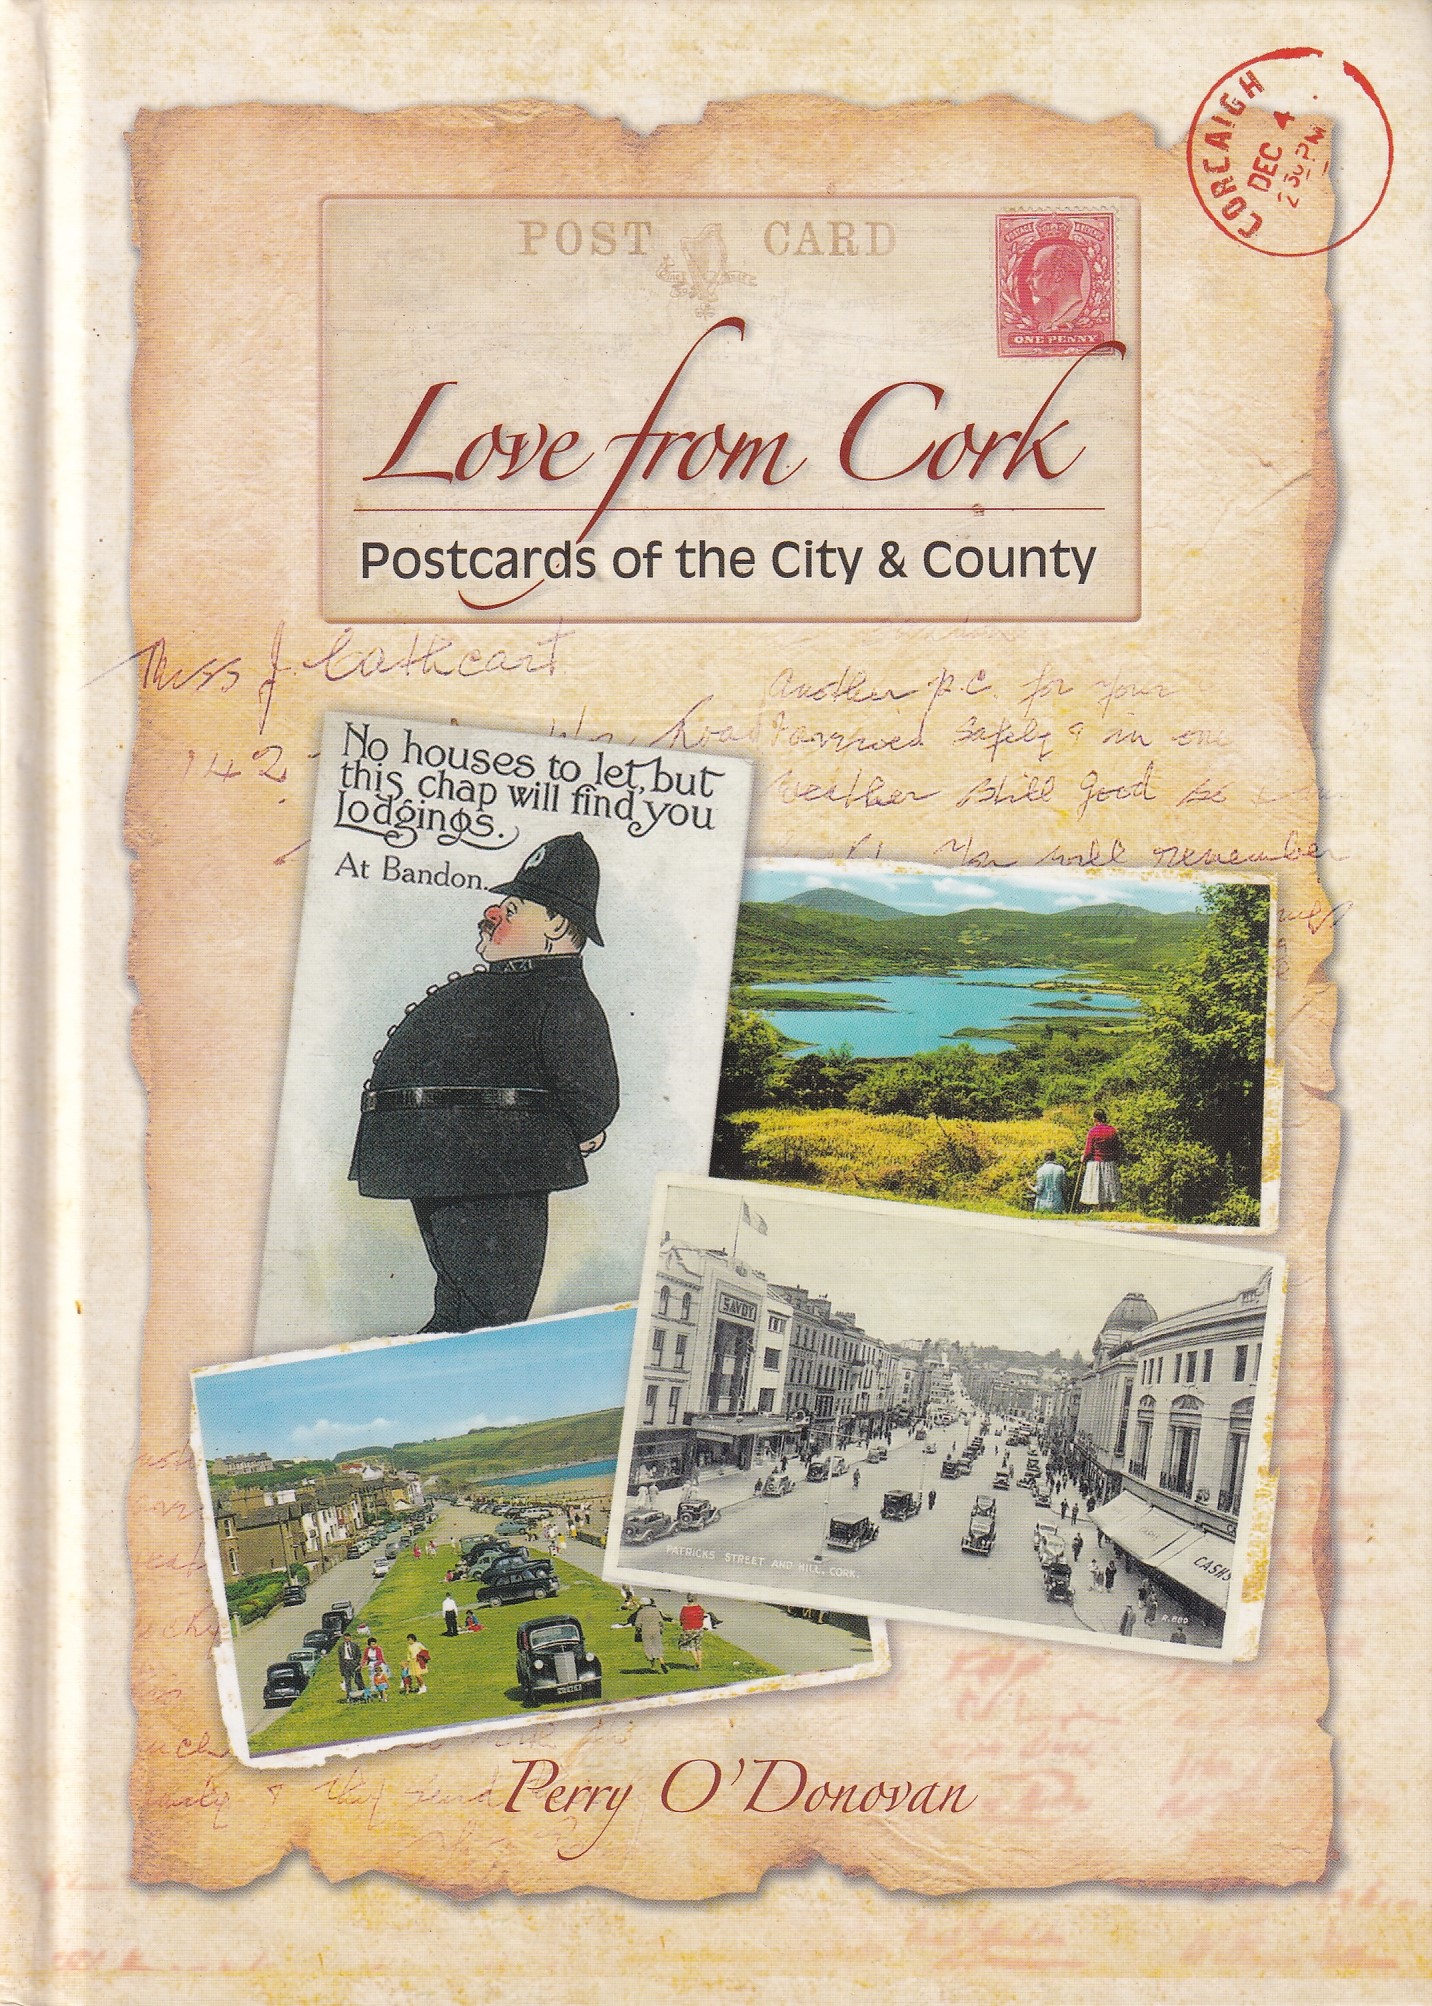 Love from Cork: Postcards of the City and County of Cork by Perry O'Donovan